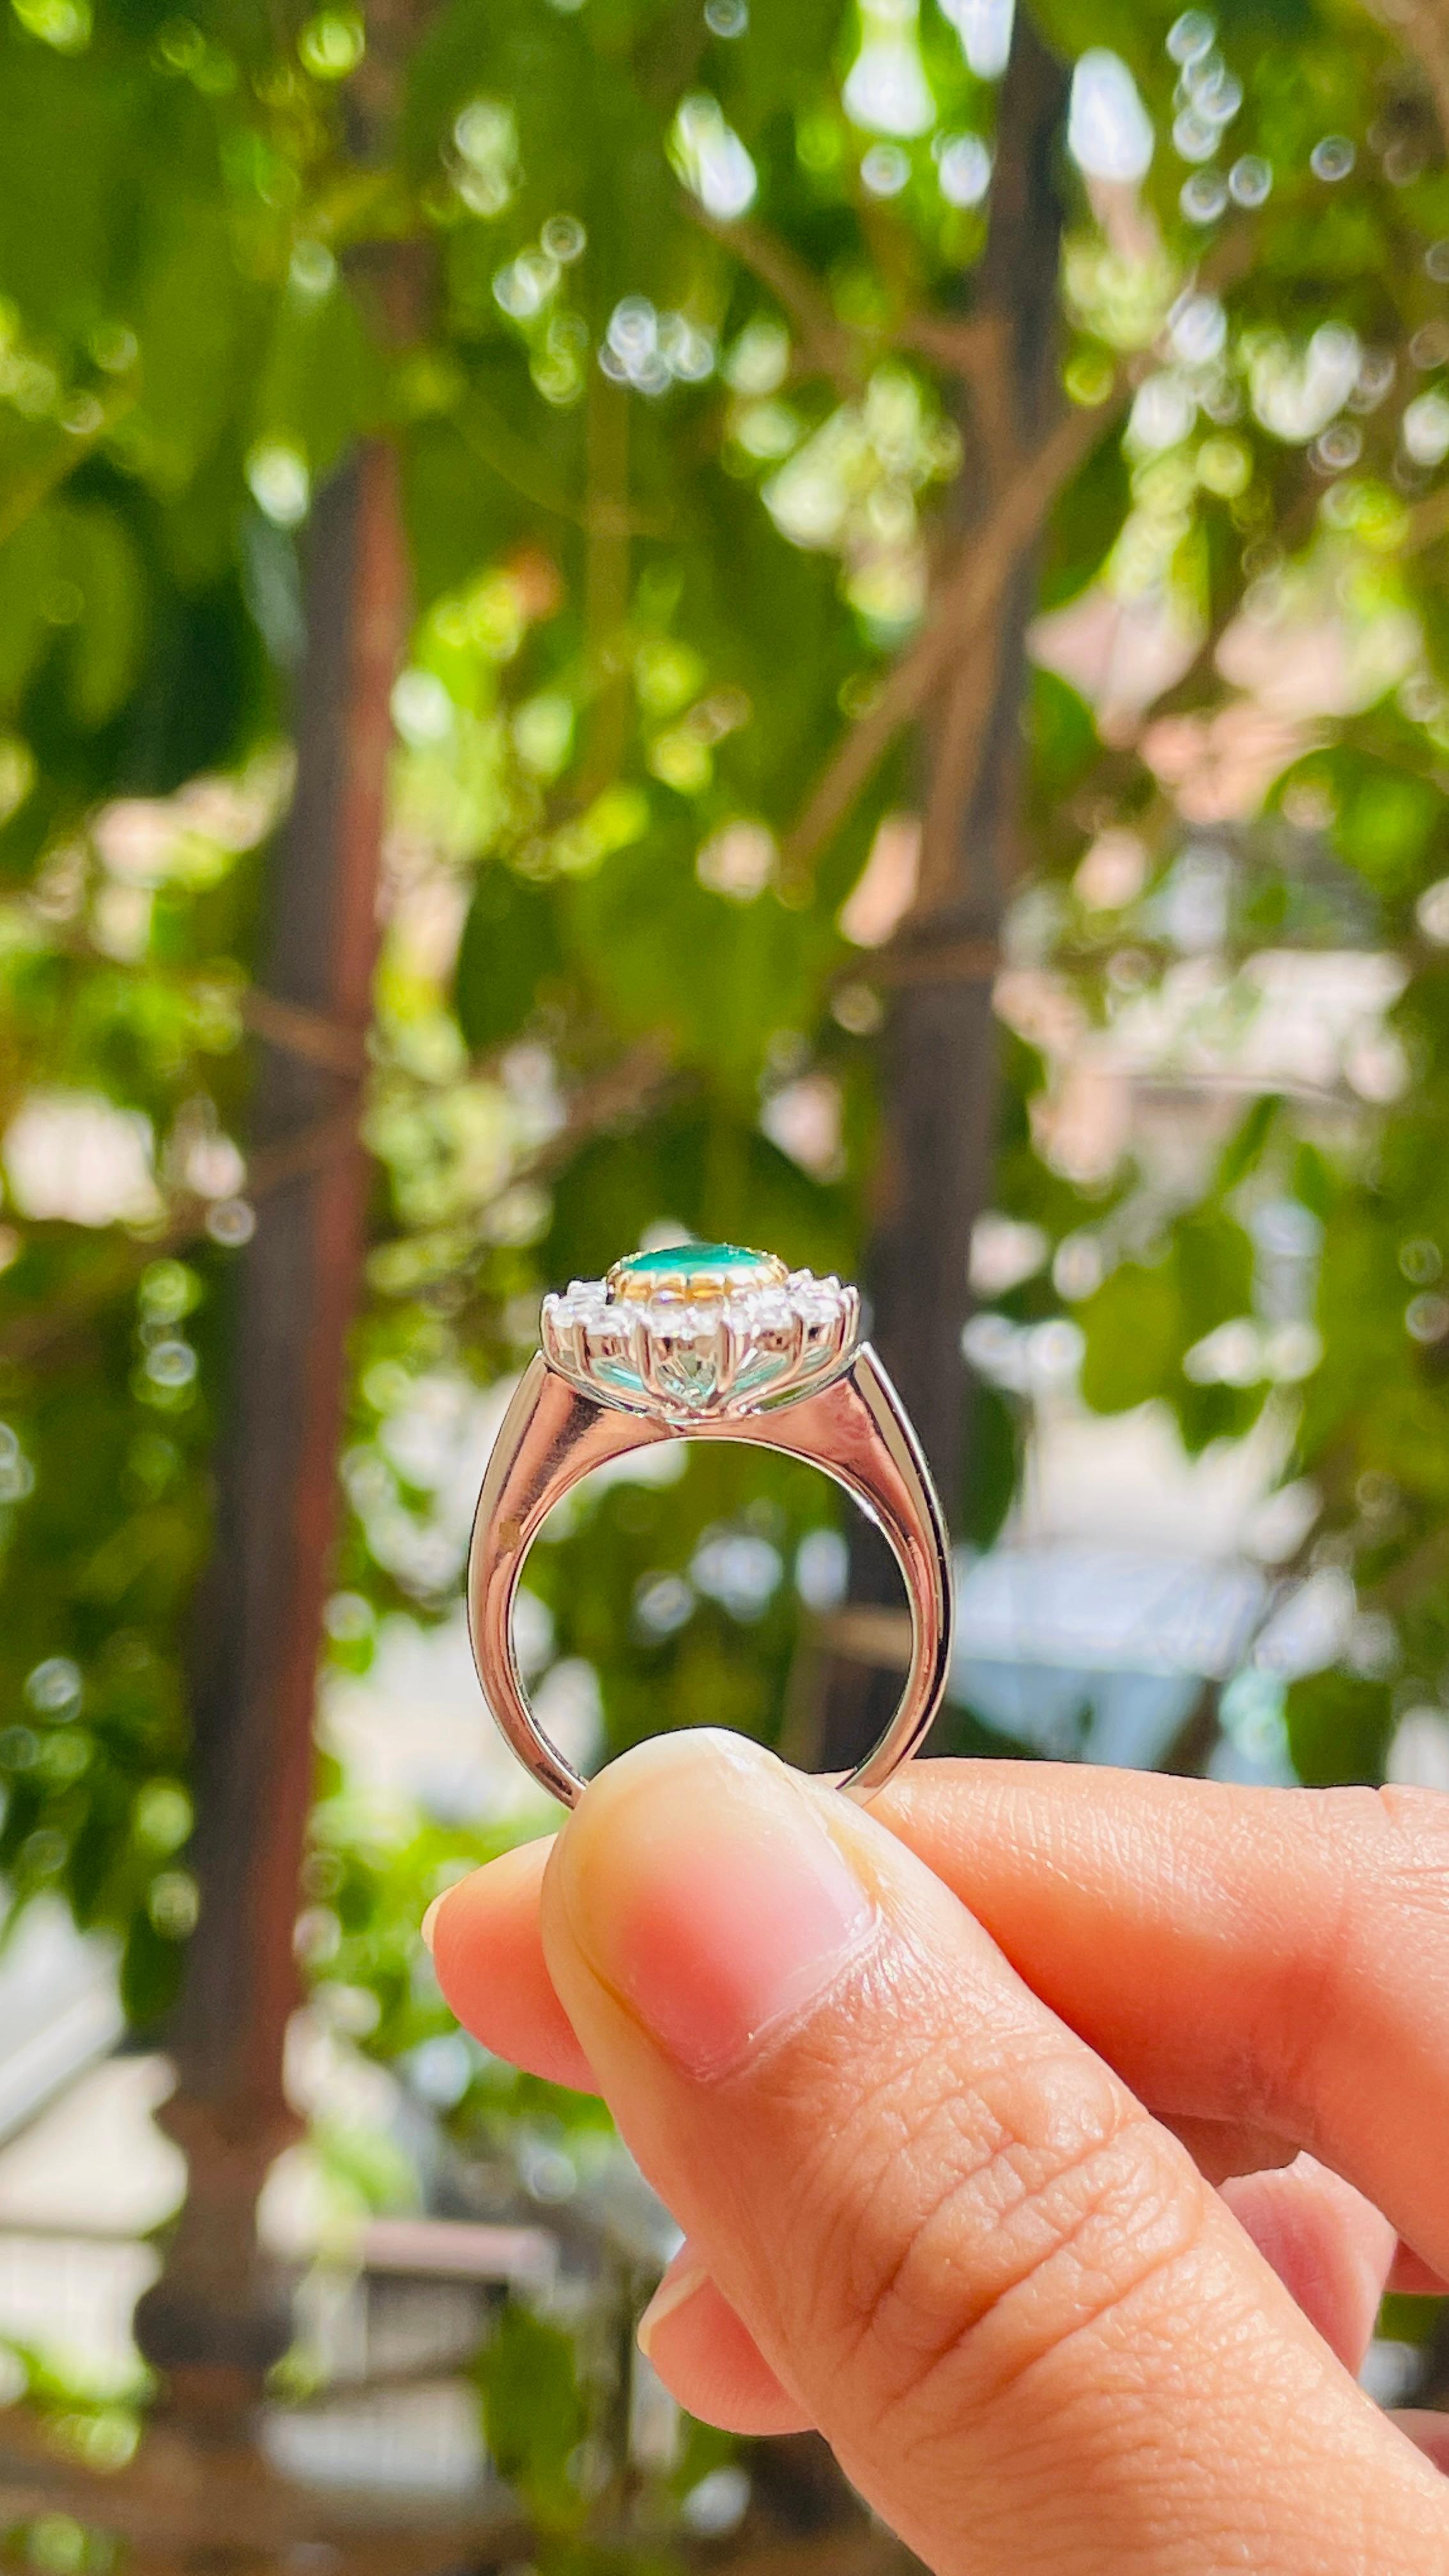 For Sale:  Big Emerald Cocktail Ring with Diamonds in 18K White Gold 6